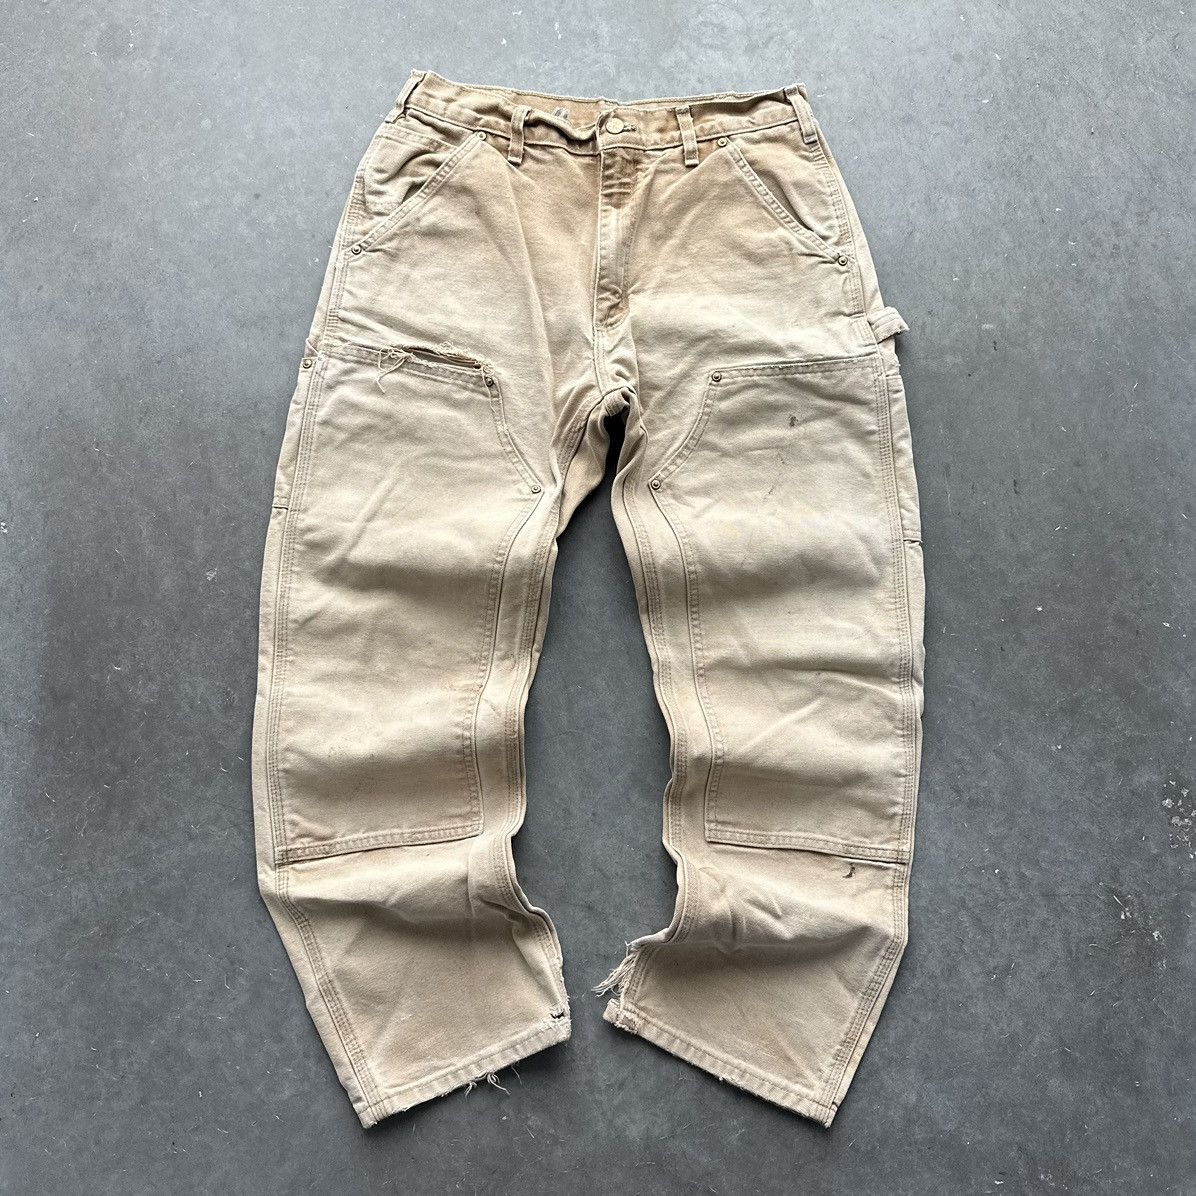 Pre-owned Carhartt X Vintage Crazy Vintage Carhartt Double Knee Pants Faded Distressed In Tan